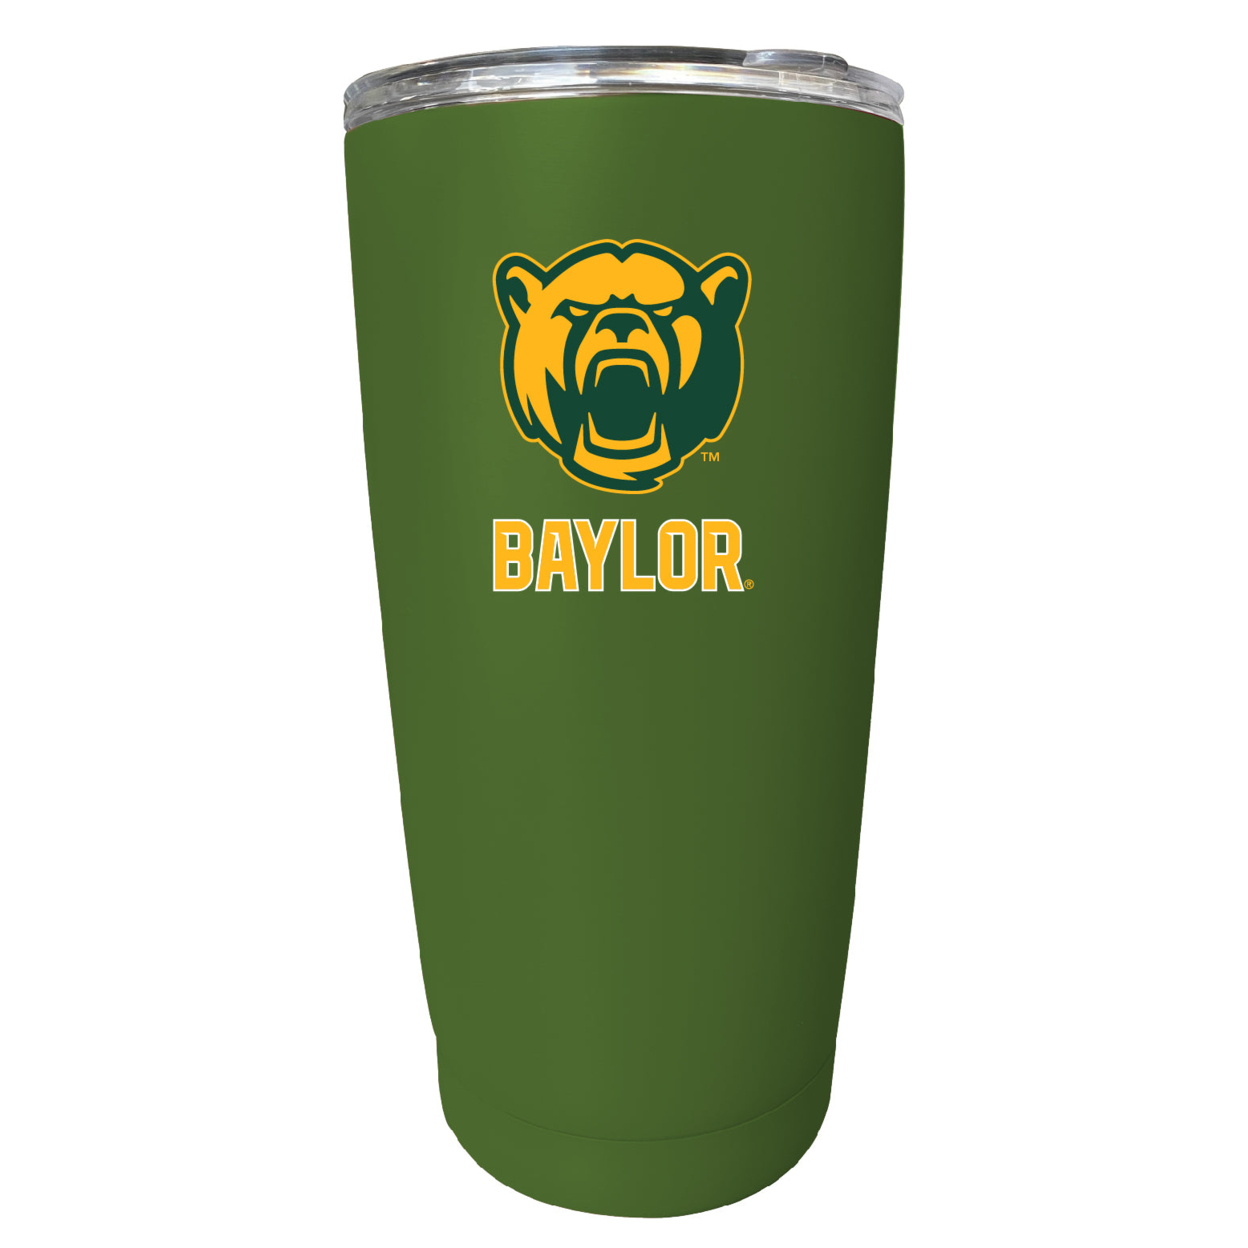 Baylor Bears 16 Oz Stainless Steel Insulated Tumbler - Gray